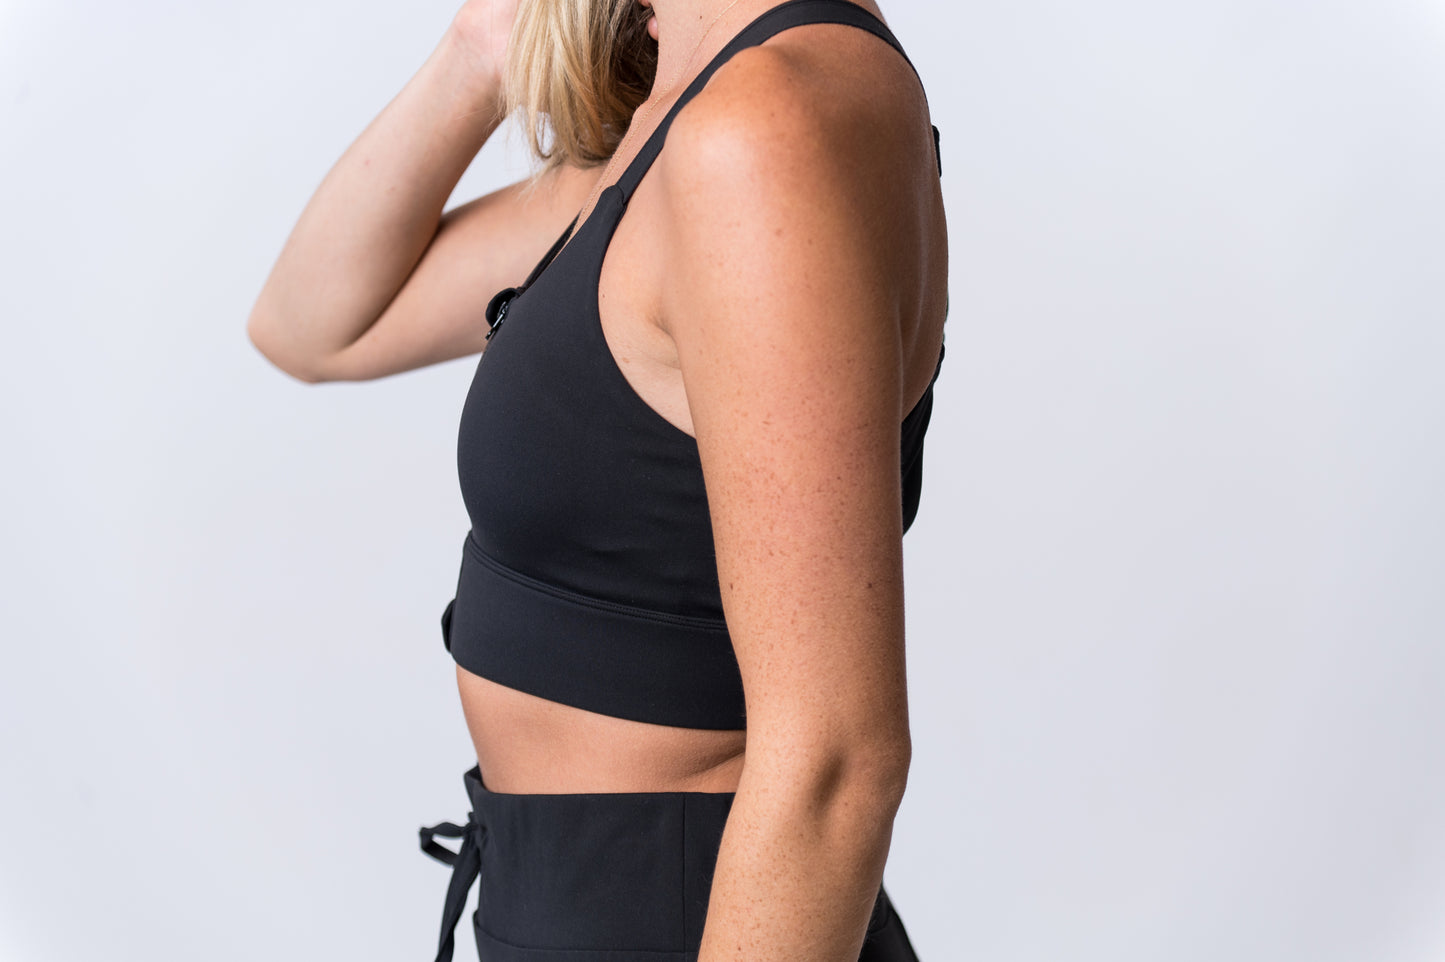 Woman wearing a black sports bra with middle zipper and black drawstring lounge pants. Side of clothing is being shown